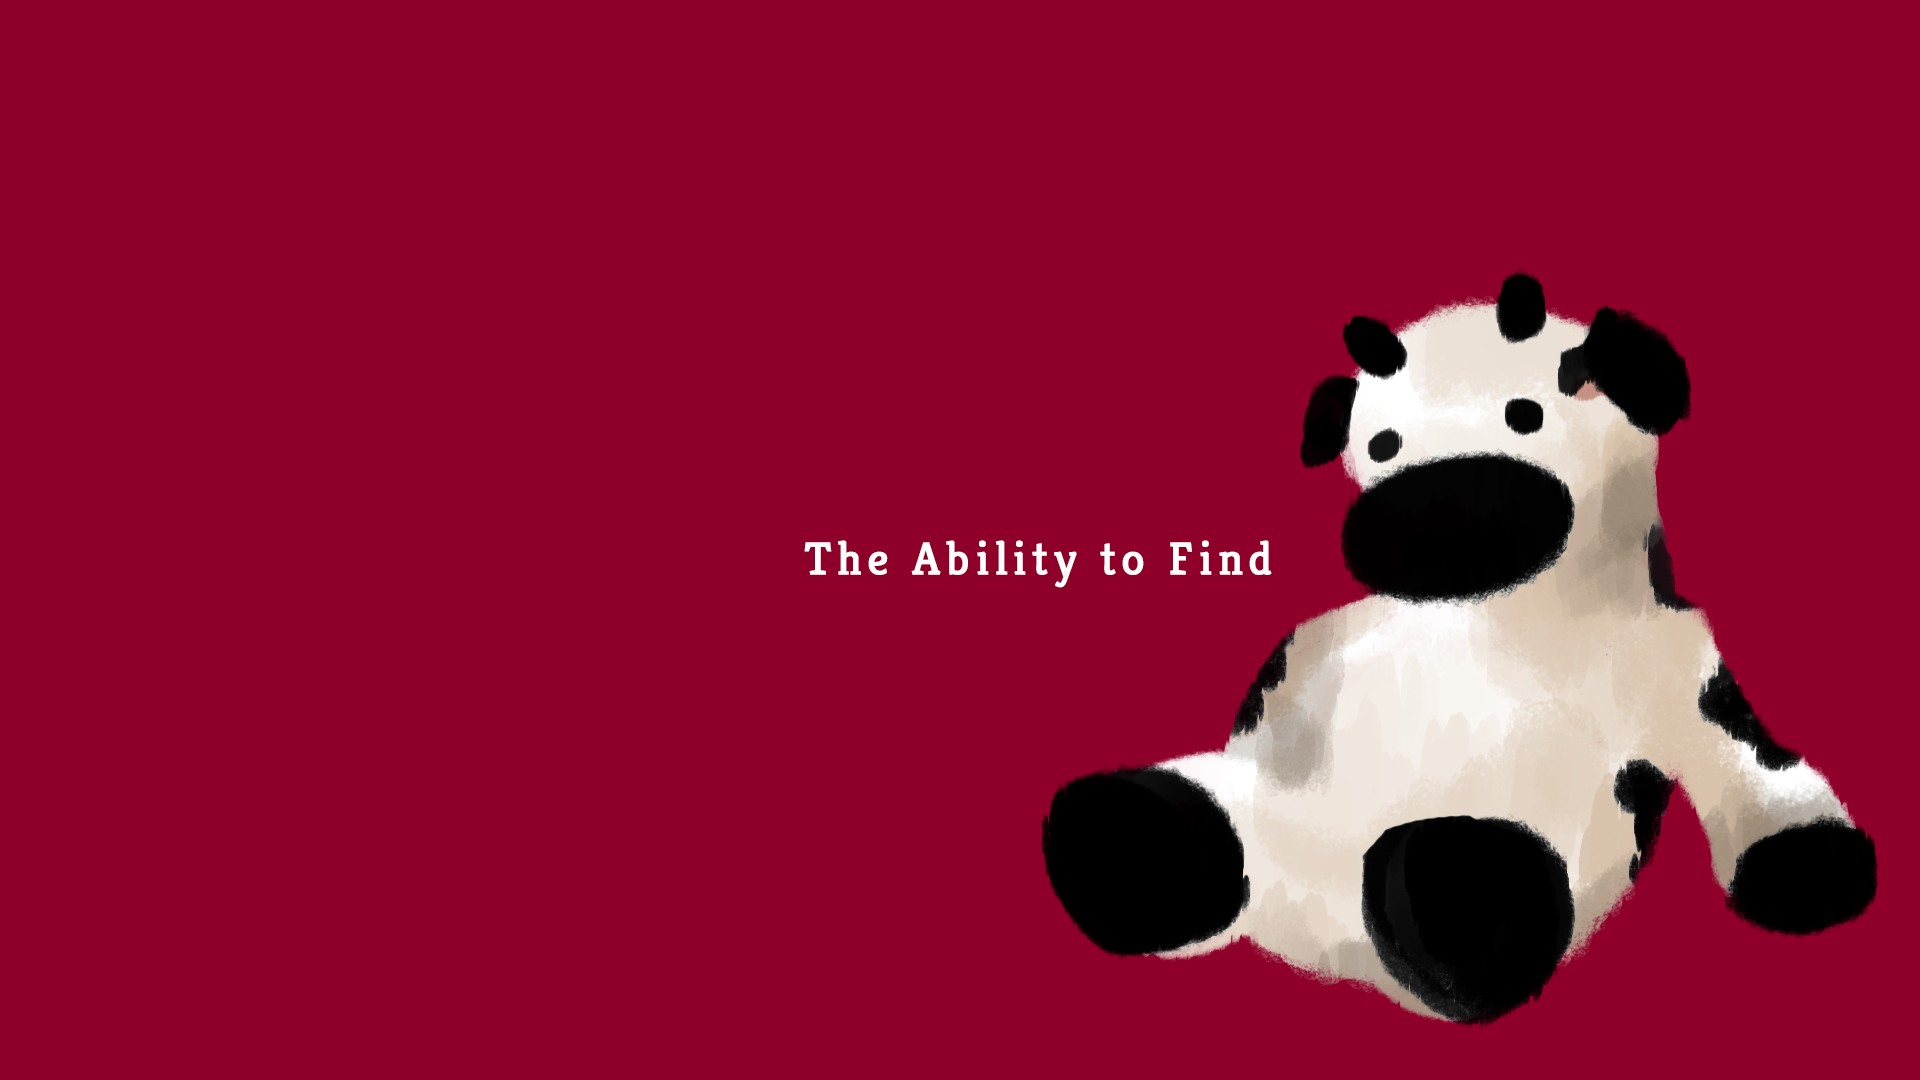 The Ability to Find